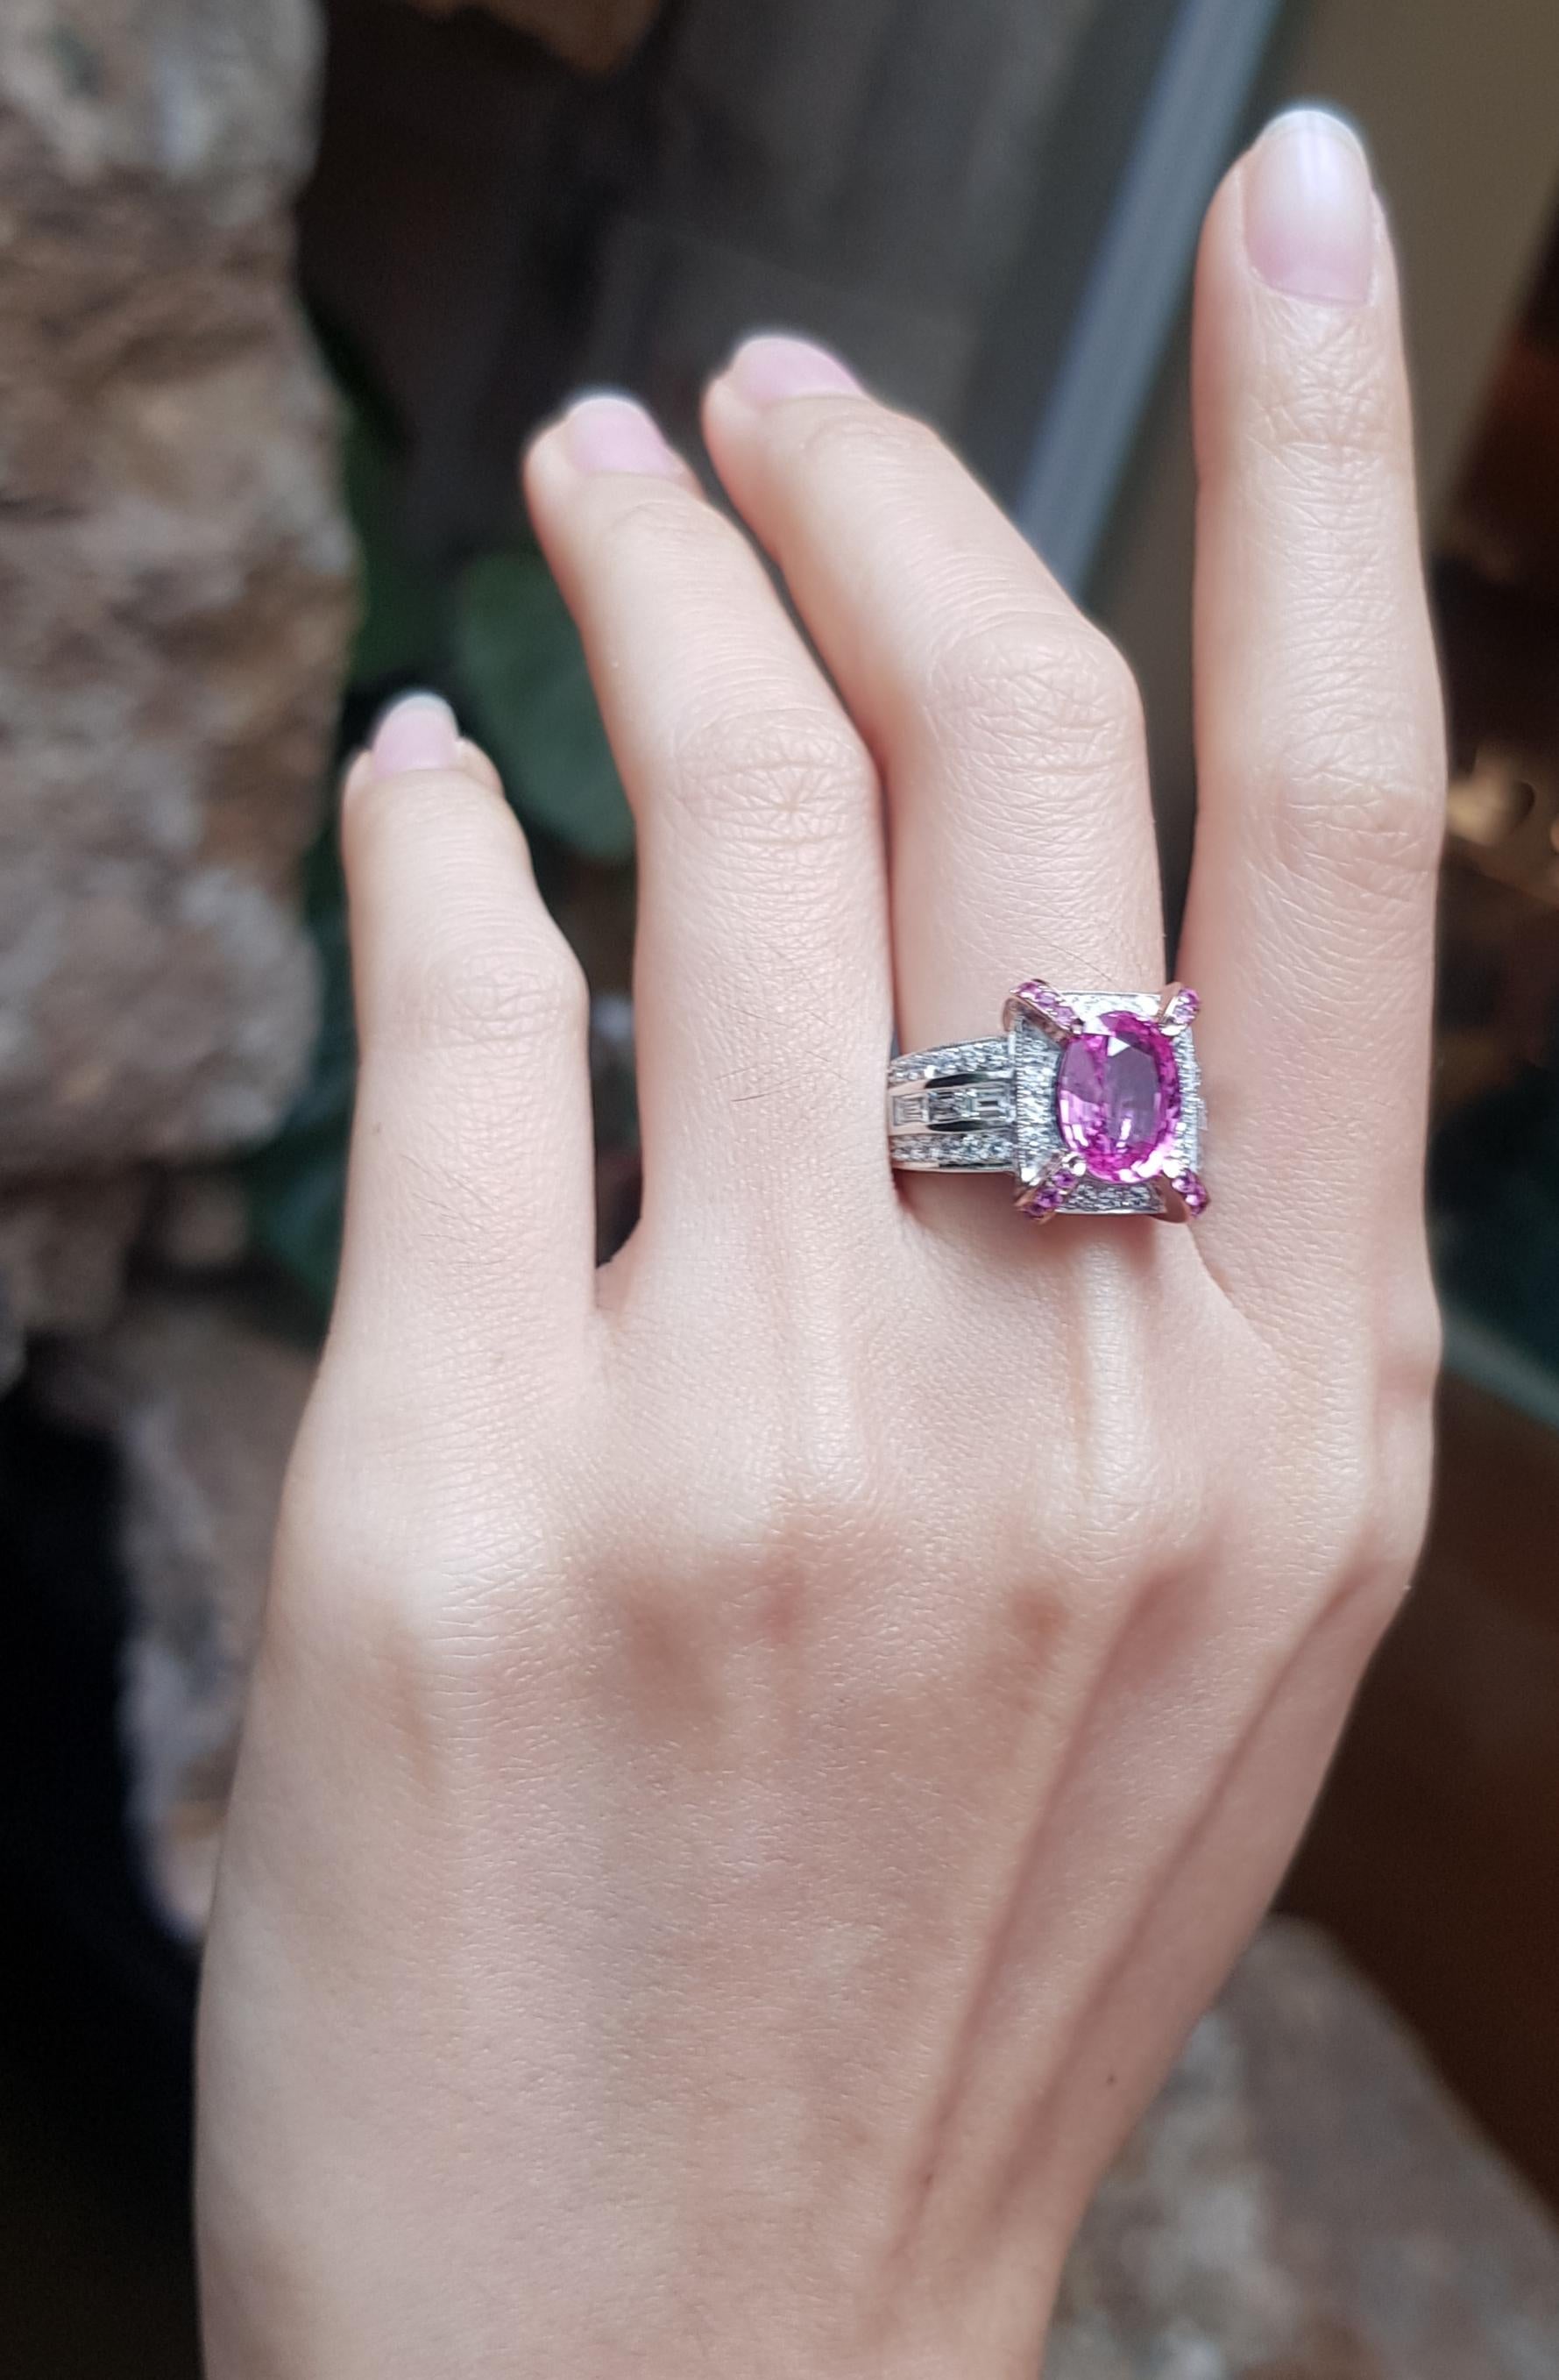 18 carats of pink sapphire